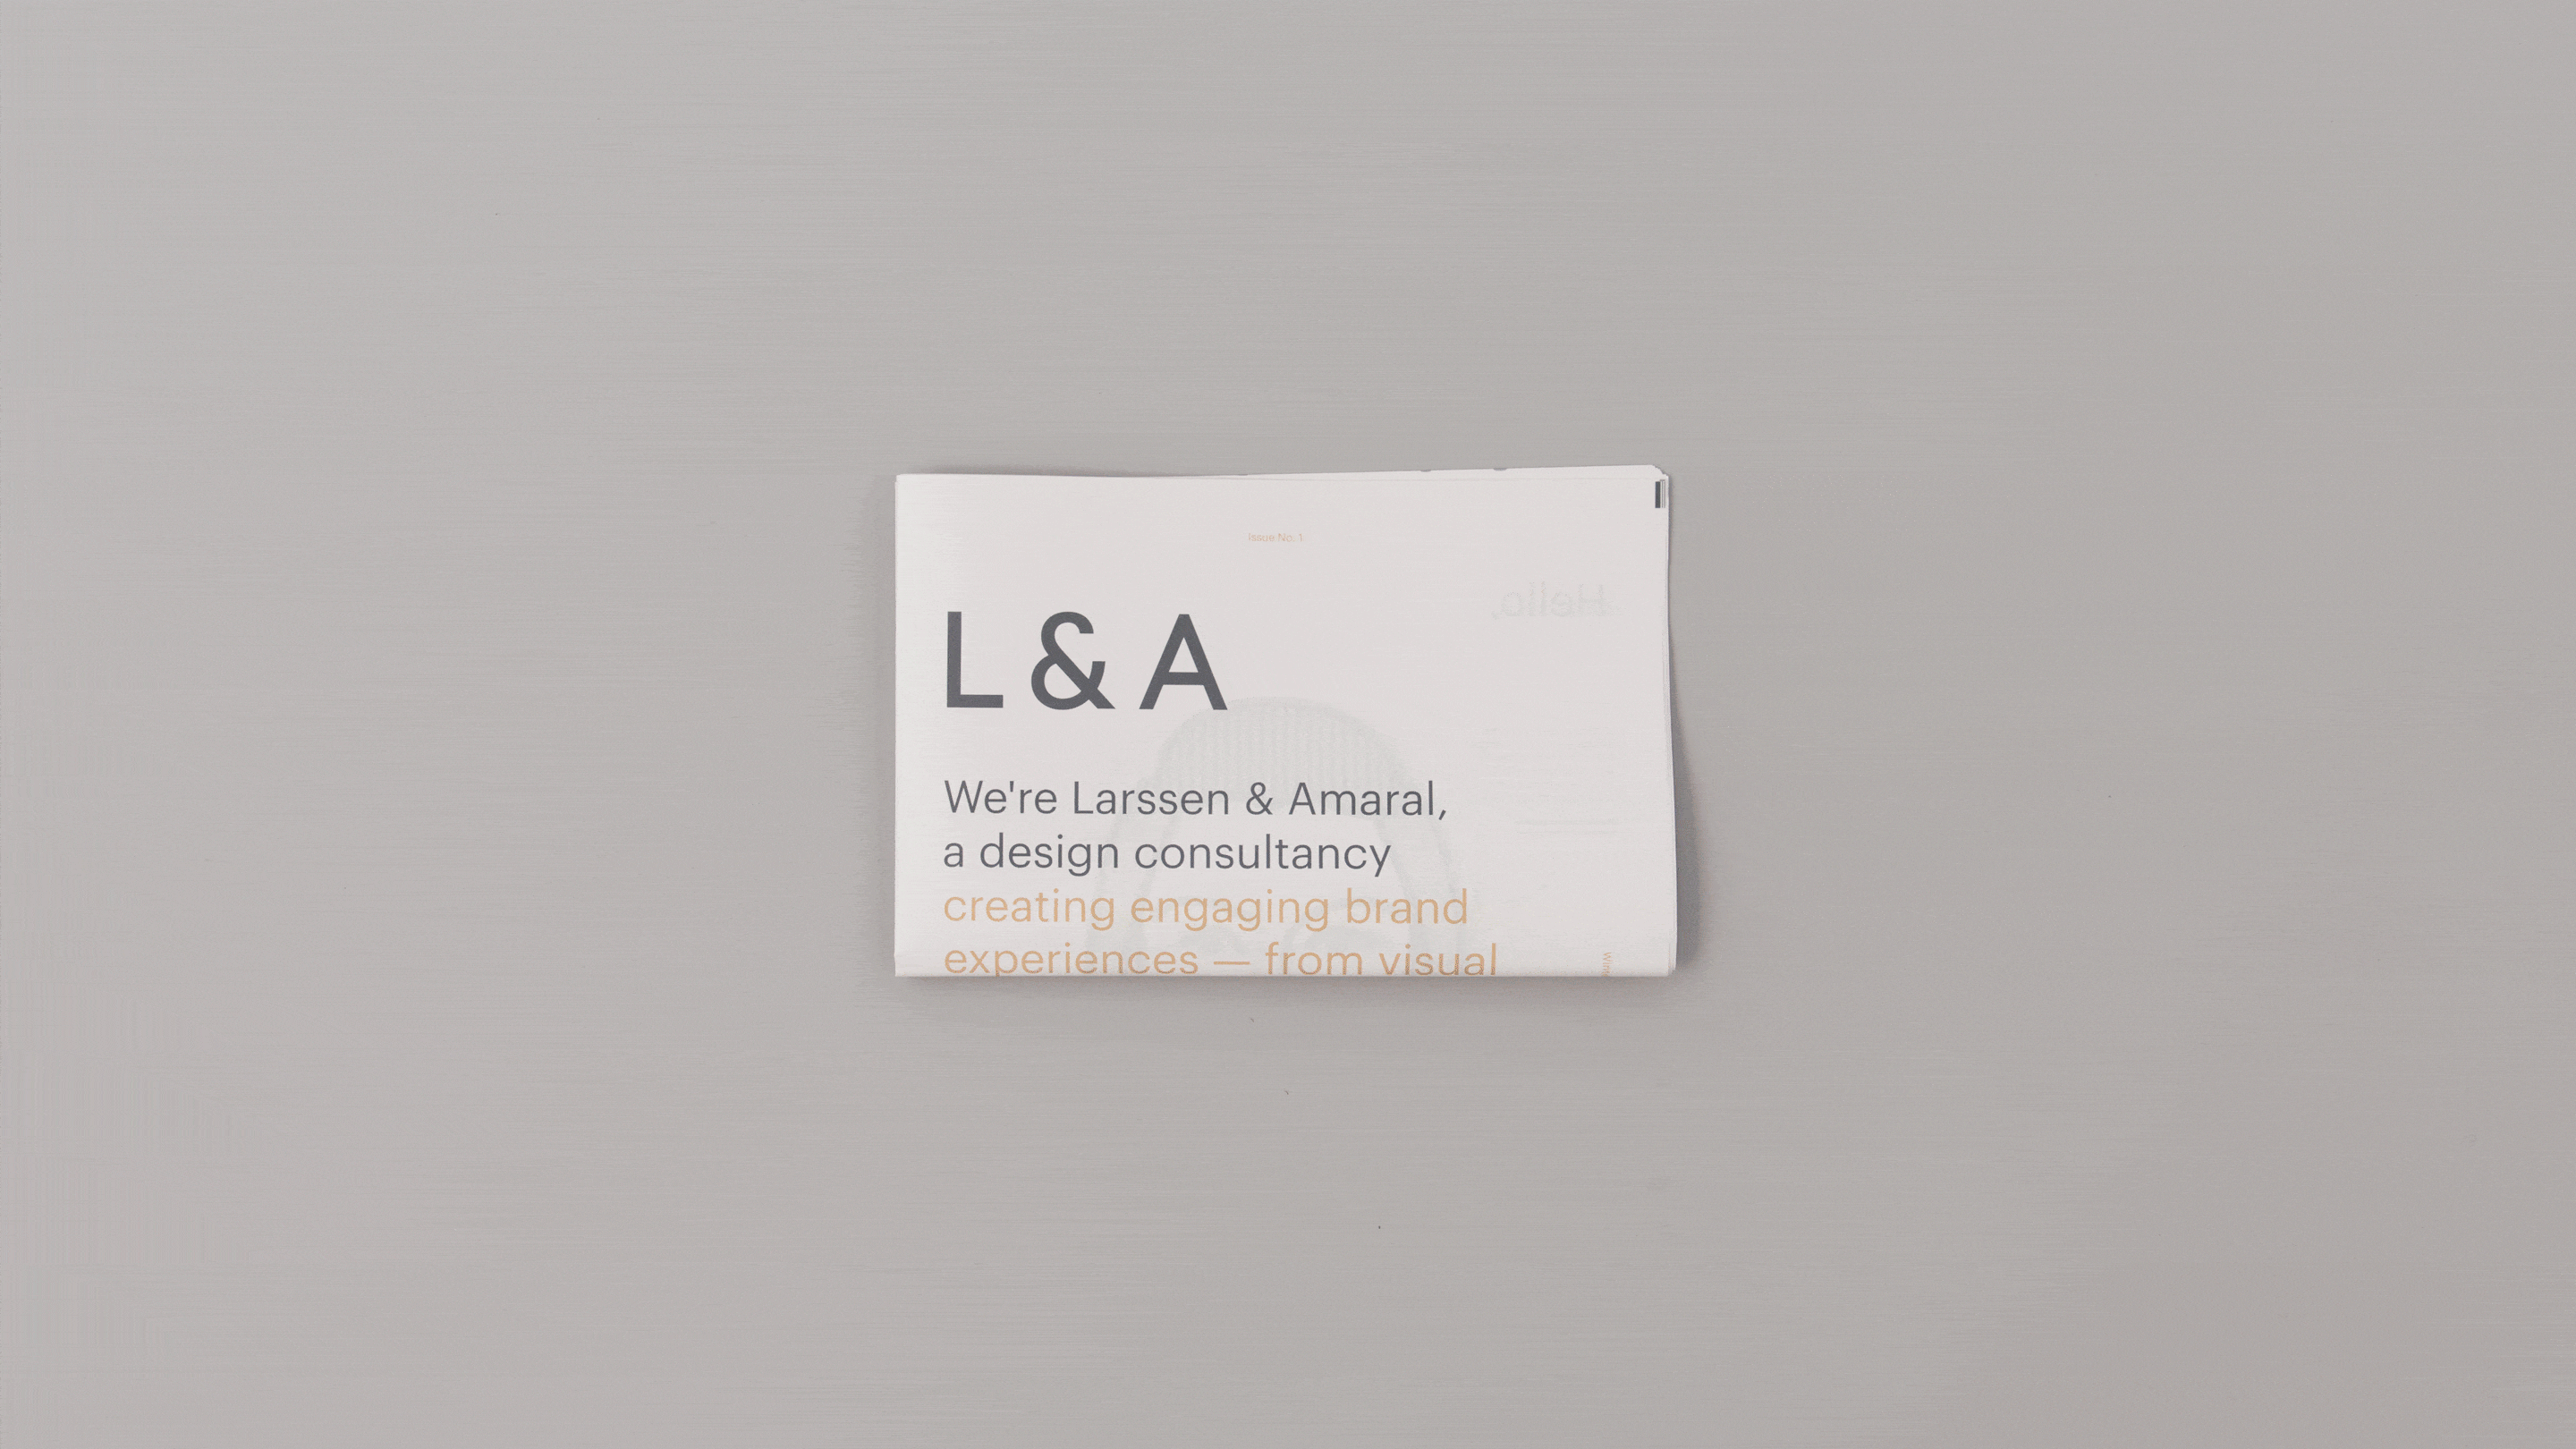 Gif of L & A branding about the company